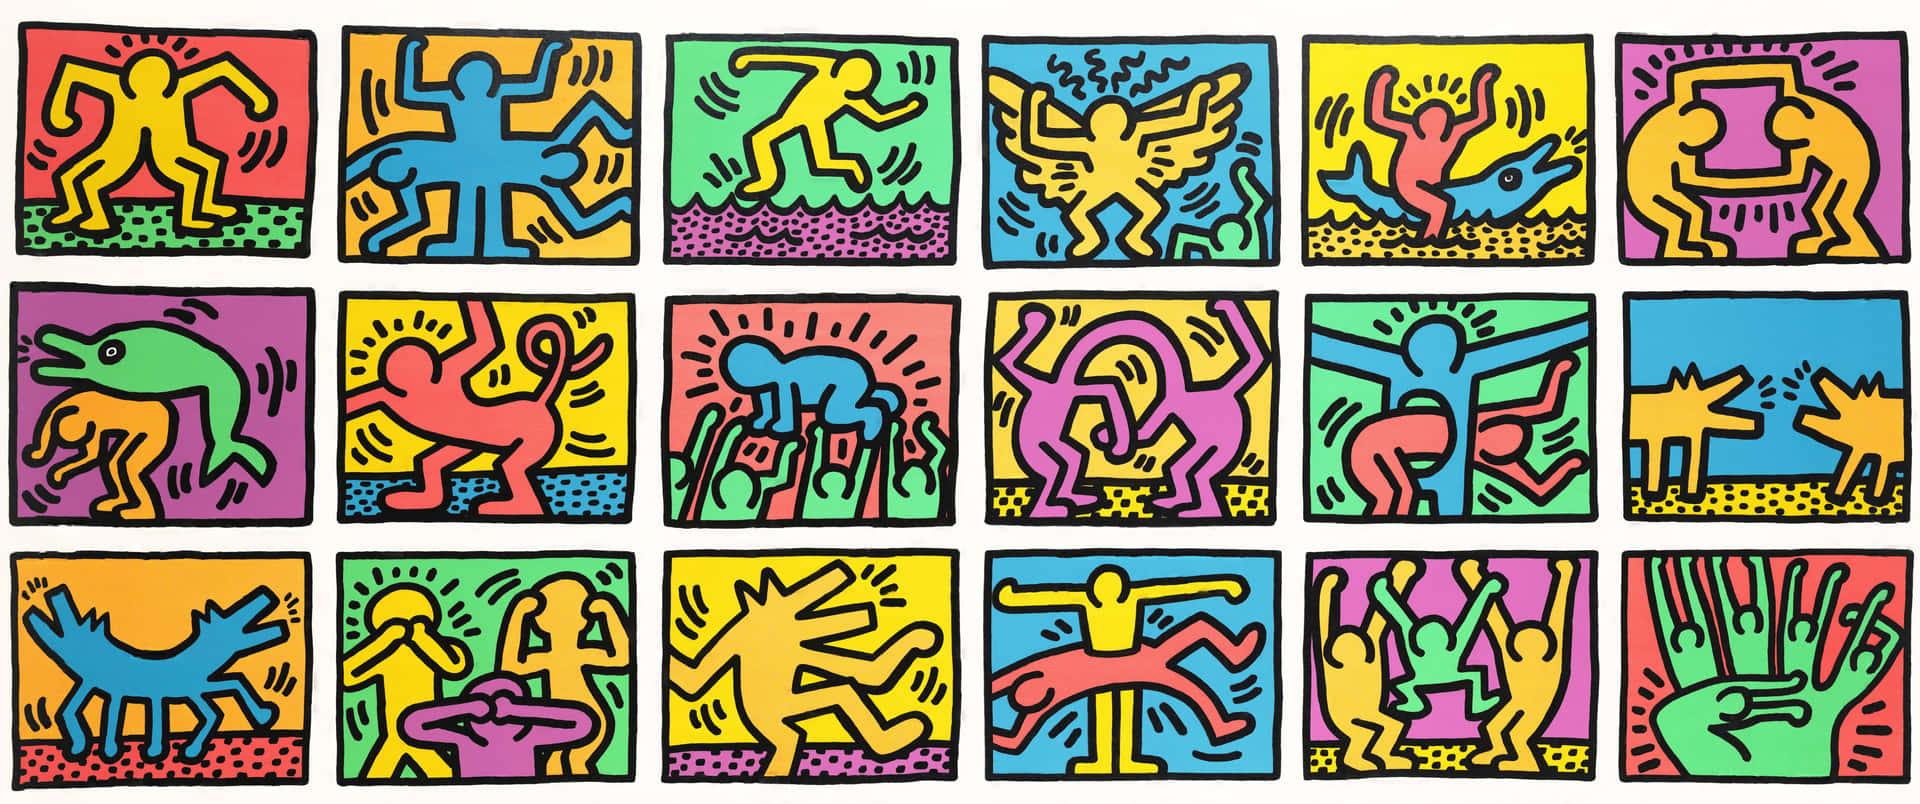 Keith Haring Inspired Pop Art Collection Wallpaper